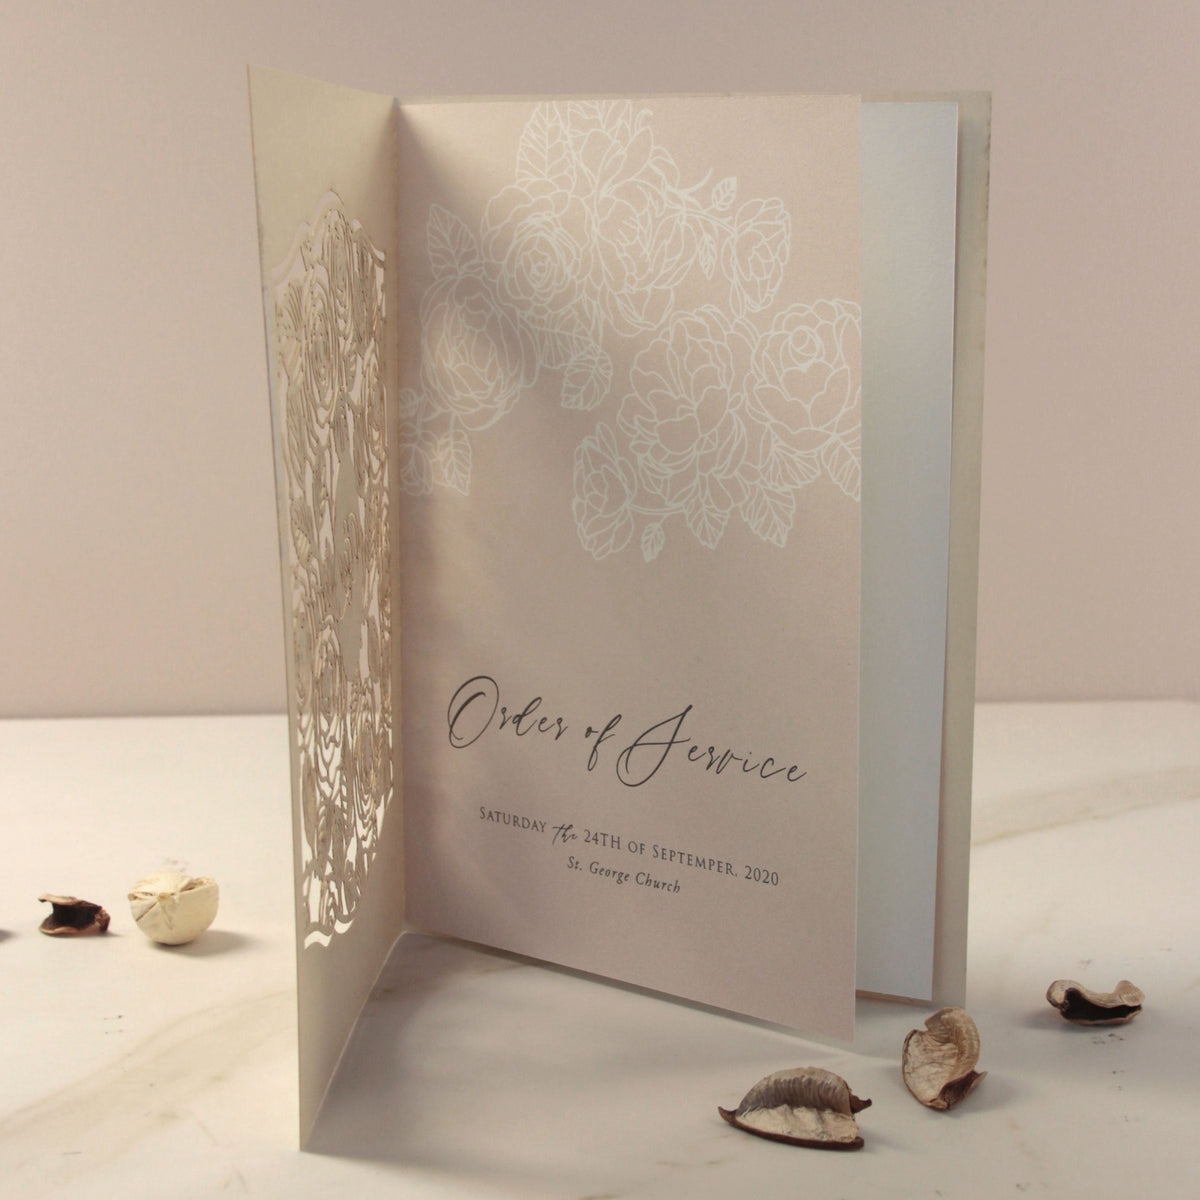 Monogram in Filigree Roses, Champagne With Dusty Rose and White Calligraphy Order of Service